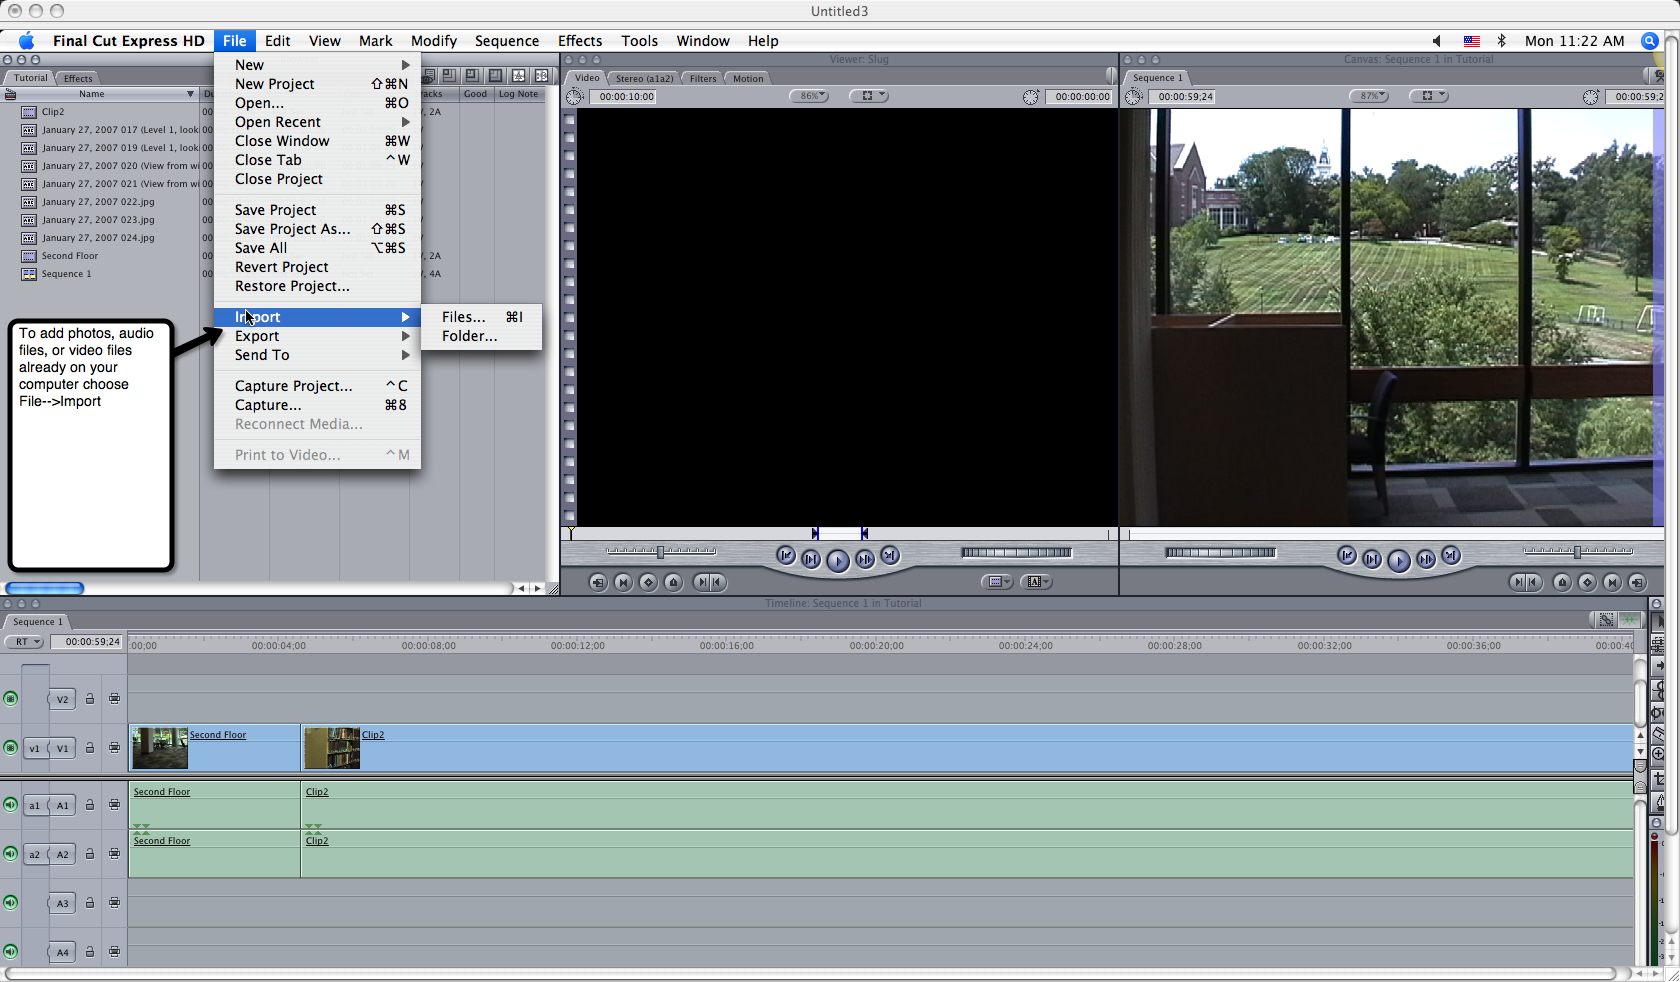 Visual guide to adding photos in Final Cut Express HD step 1.